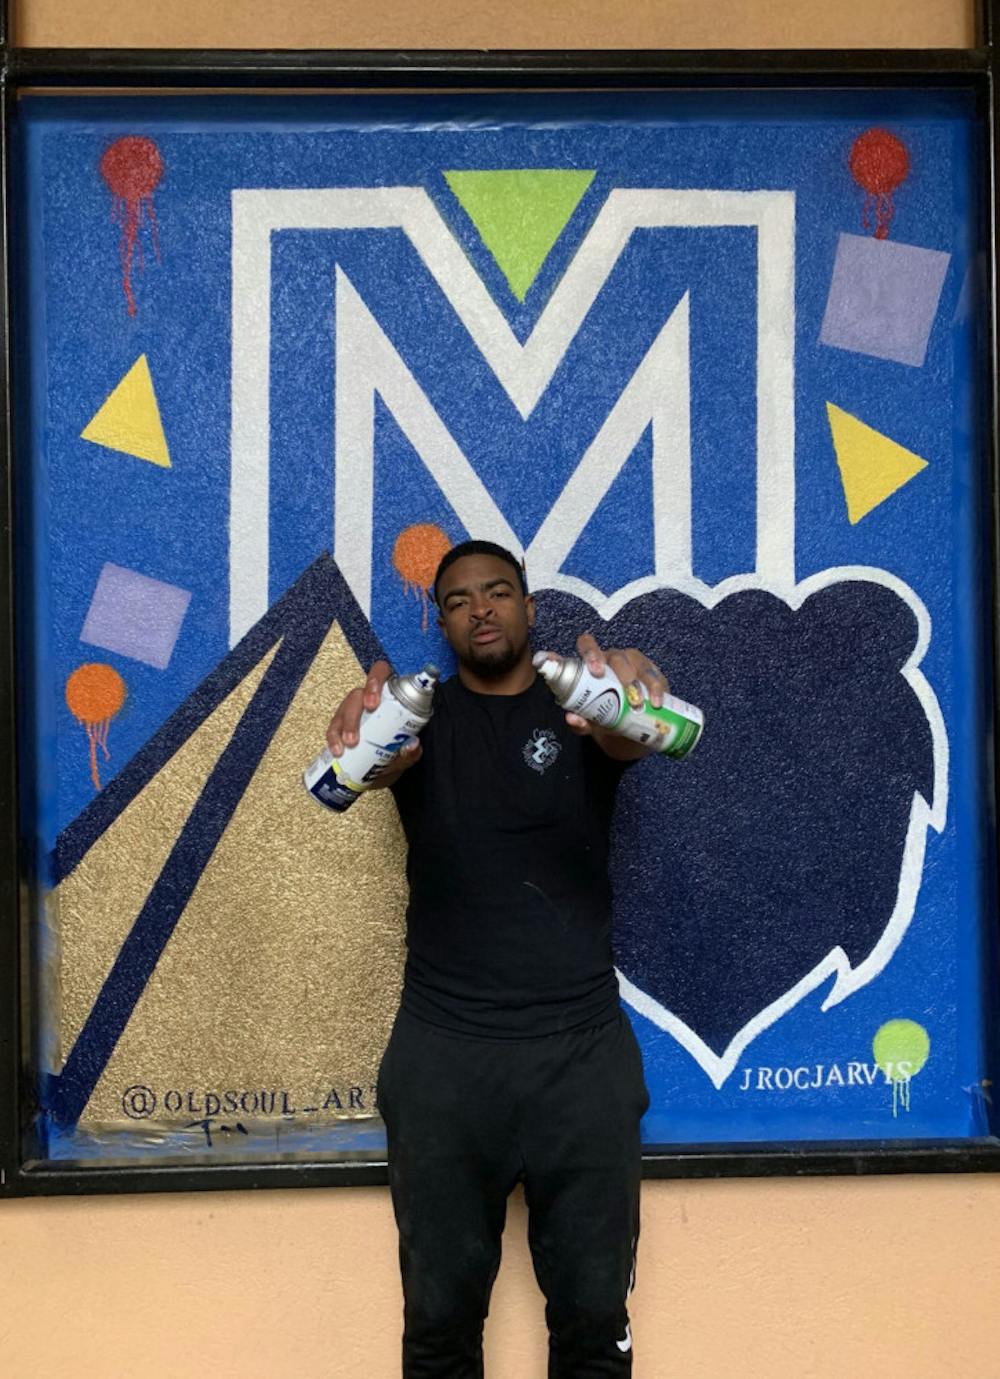 <p class="p1"><span class="s1"><strong>UofM senior, Jarvis Howard, posing behind an abstract mural he spray-painted as commissioned by Oak Court Mall.</strong></span></p>